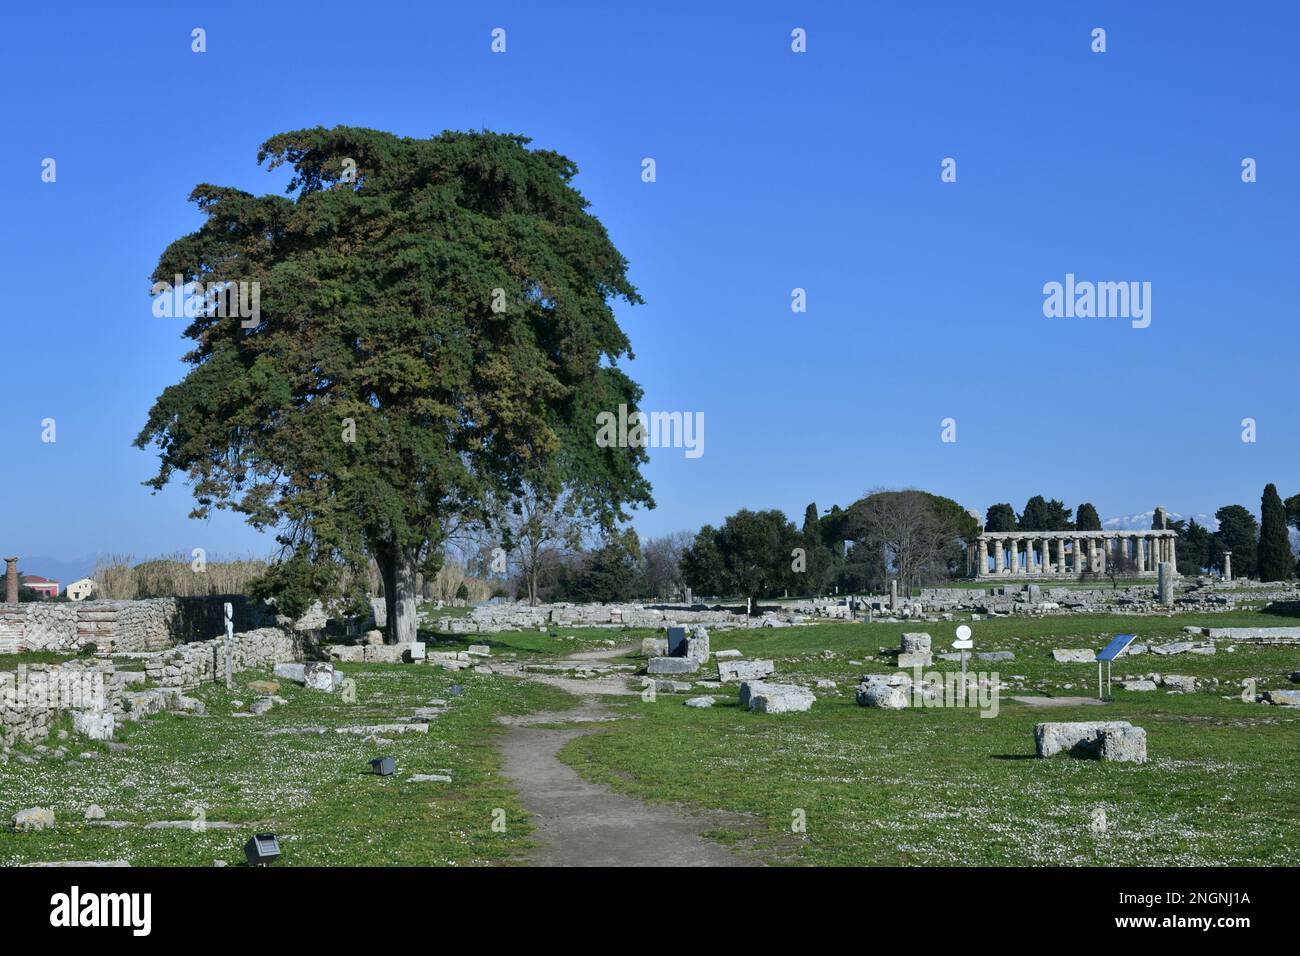 Architecture of an ancient Greek temple in the archaeological park in Salerno province, Campania state, Italy. Stock Photo